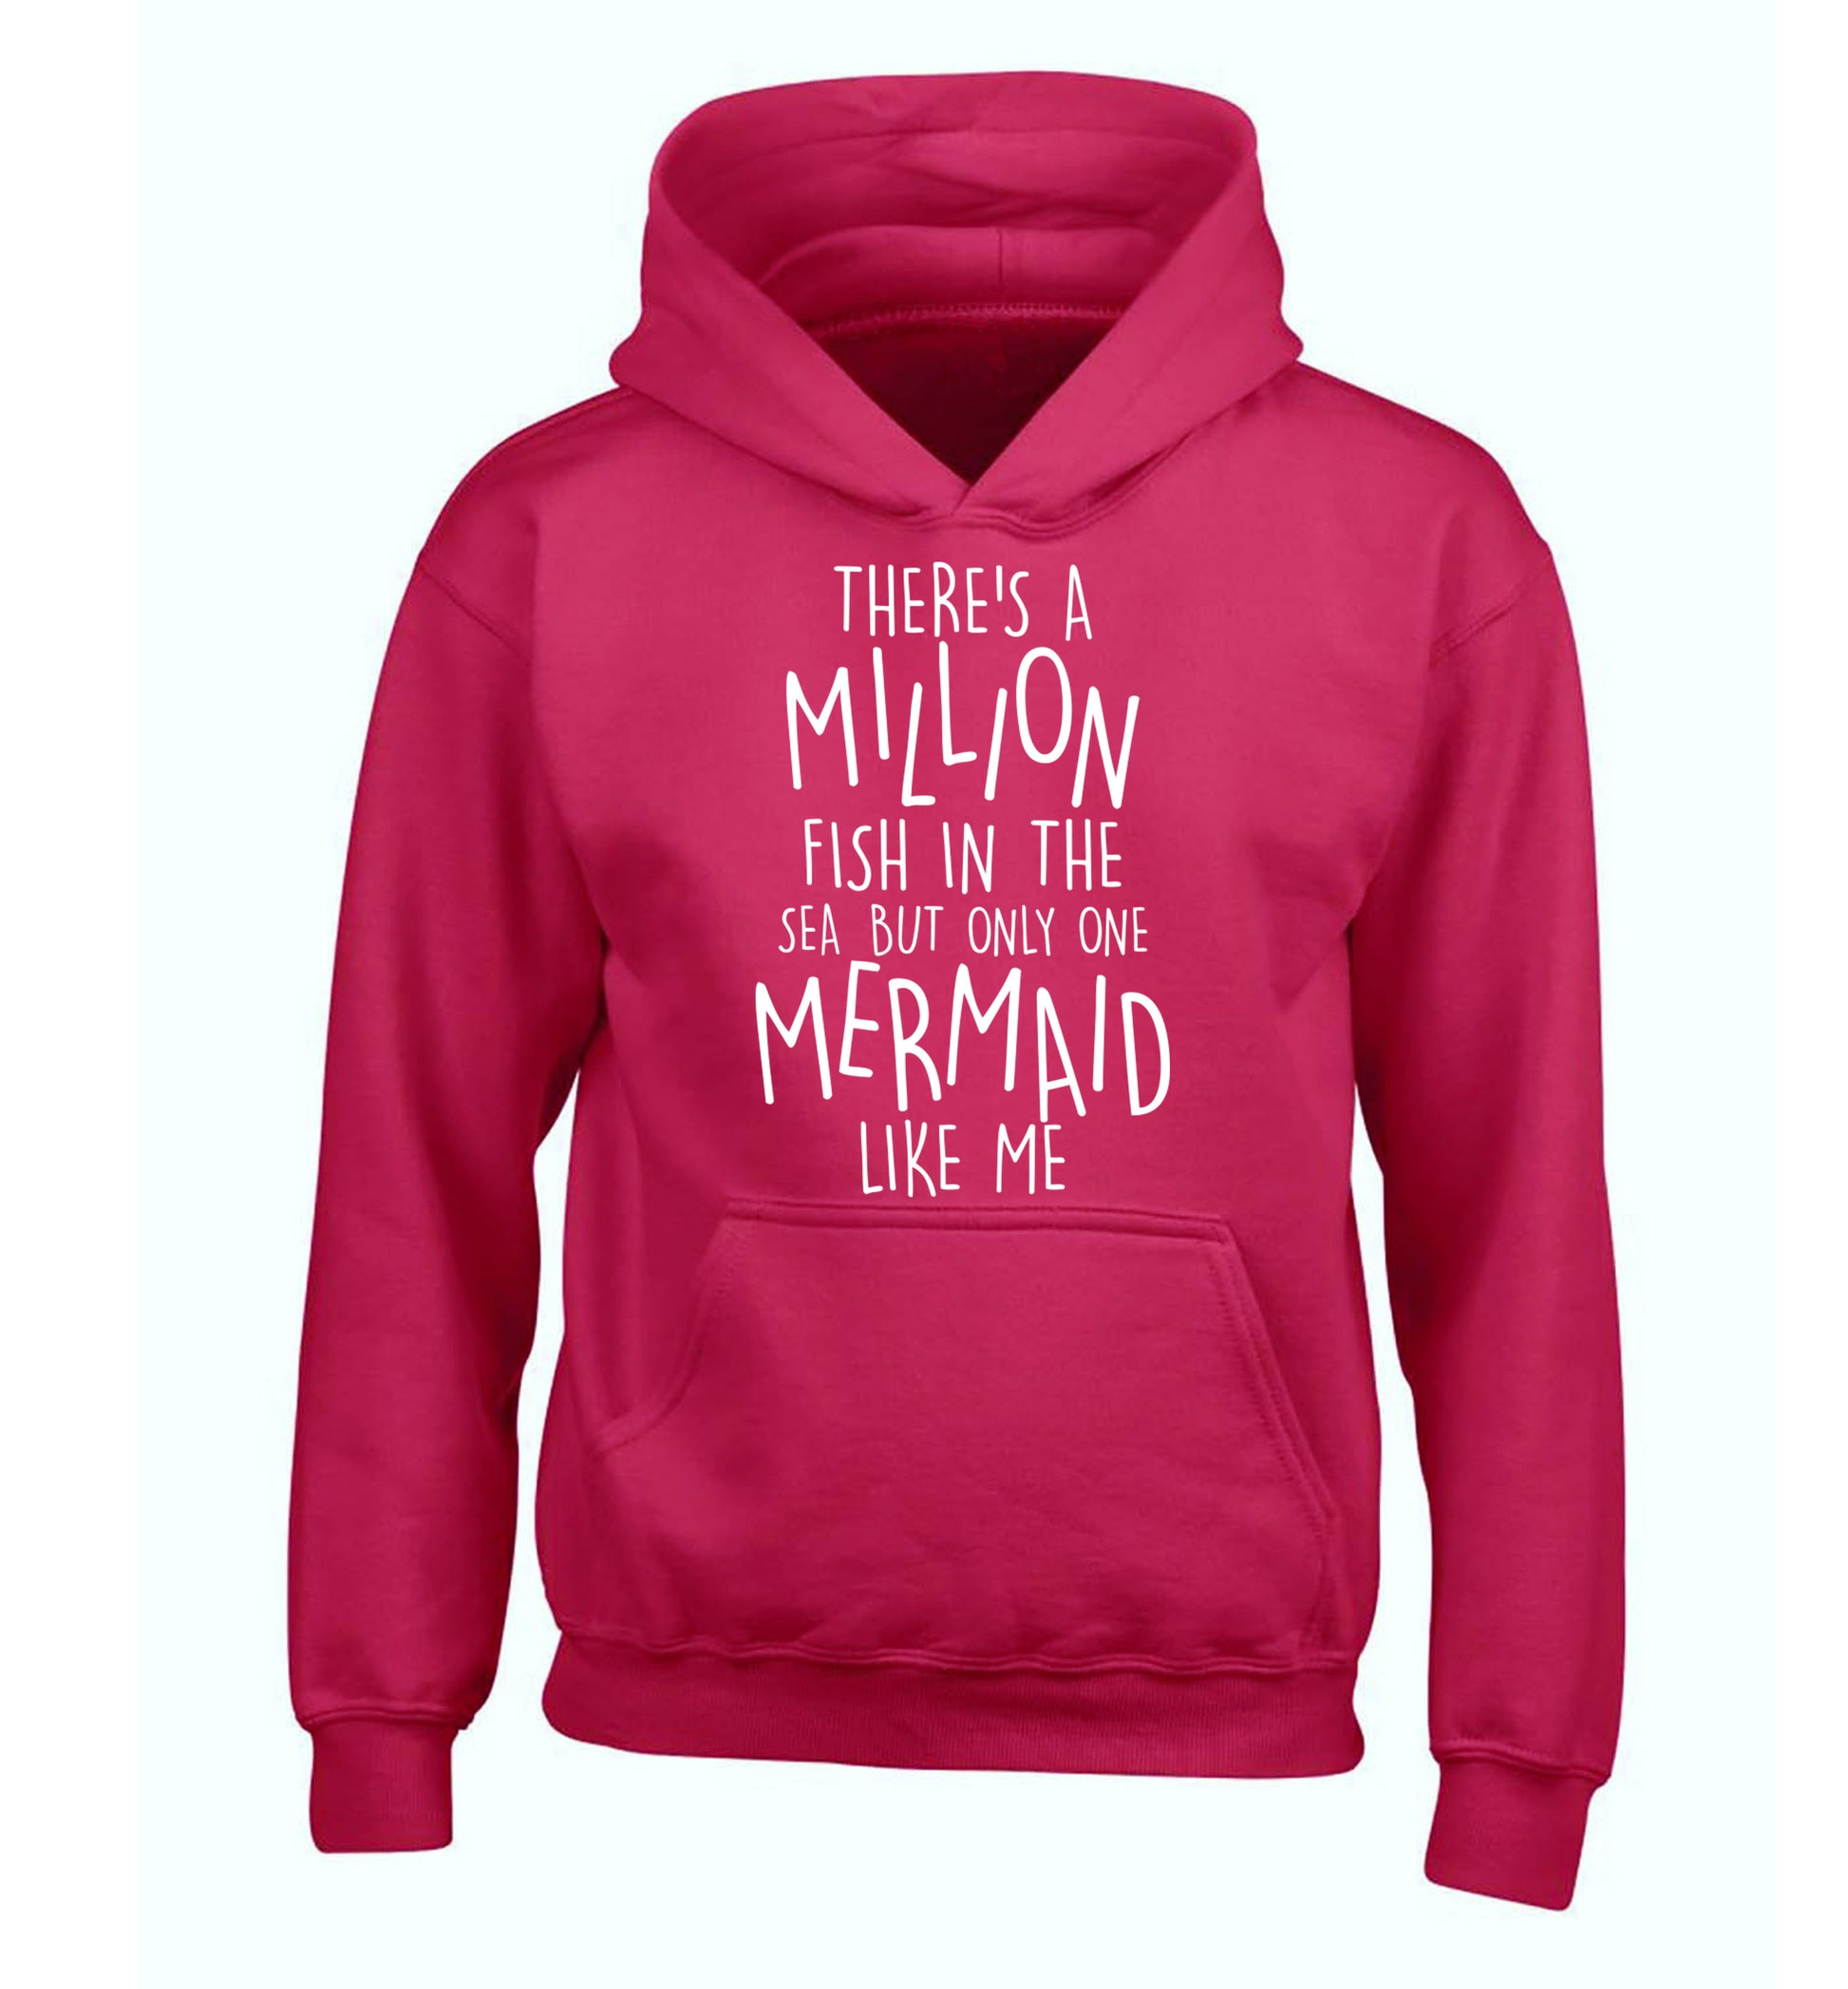 There's a million fish in the sea but only one mermaid like me children's pink hoodie 12-13 Years